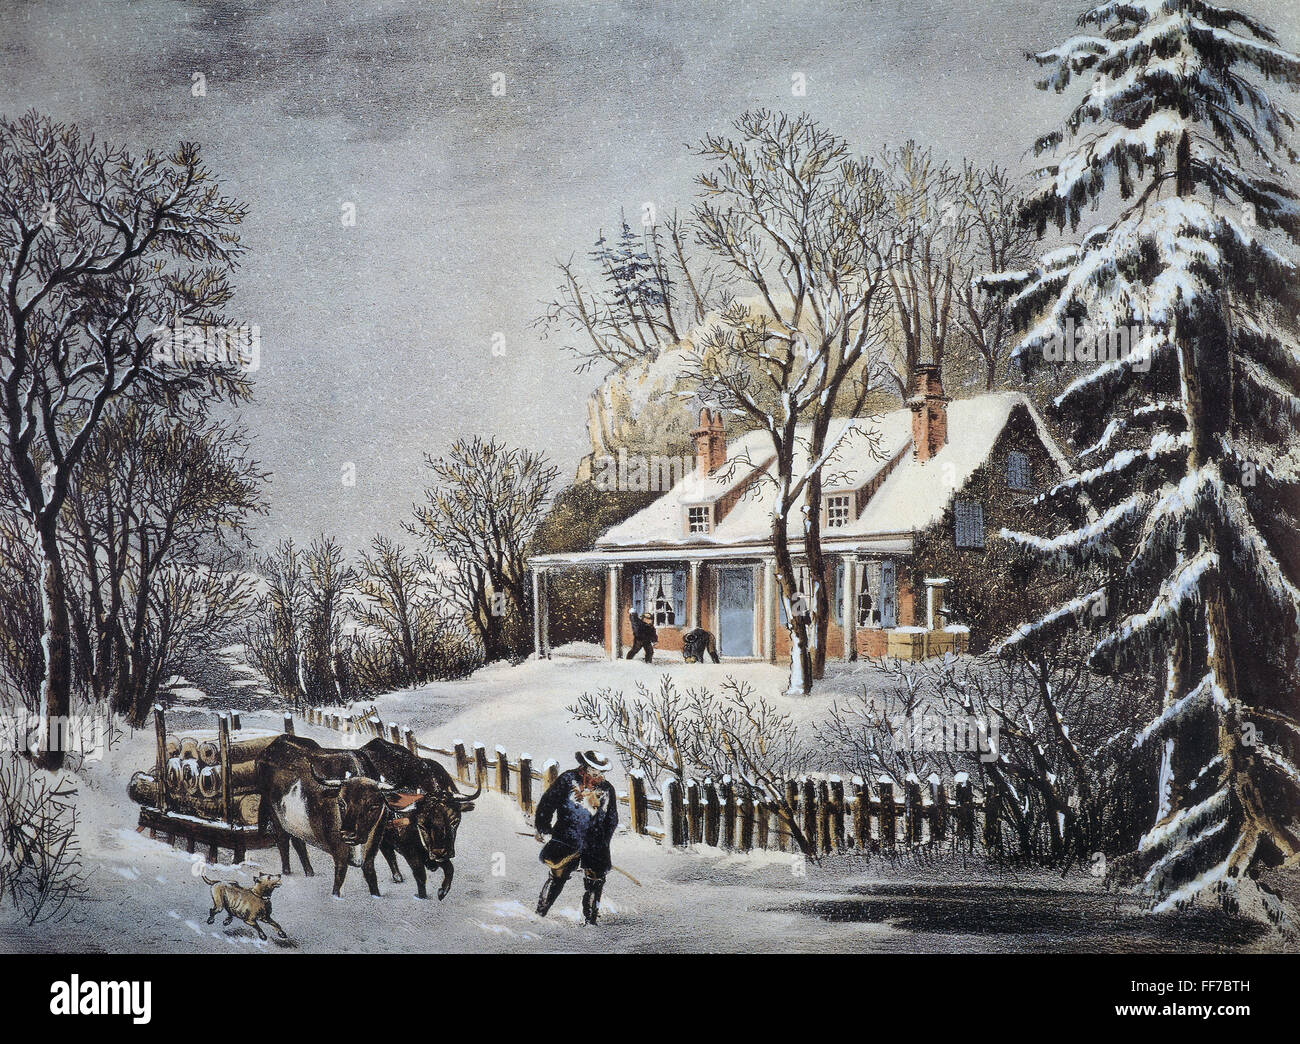 CURRIER & IVES: WINTER SCENE. /n'The Snow Storm.' Undated (c1860) lithograph by Currier & Ives. Stock Photo